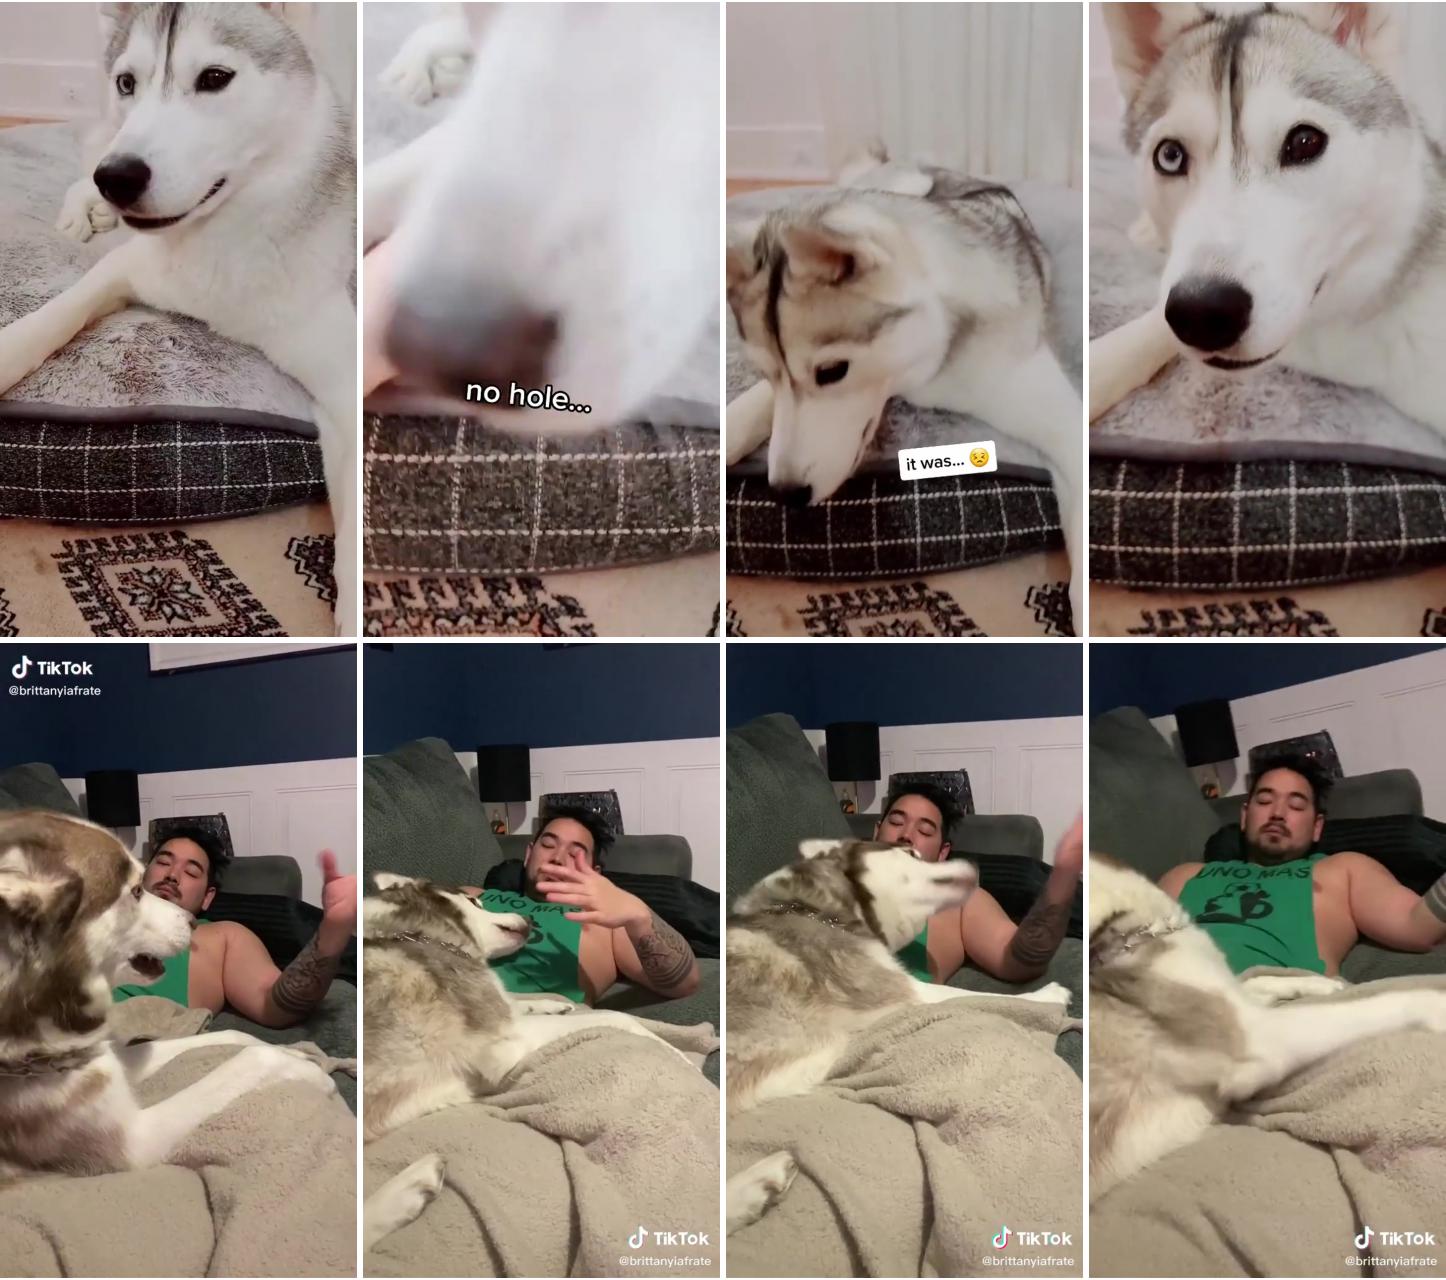 Husky makes a hole in her new dog bed and tries to blame owner; brittanyiafrate on tiktok, when owners tease their dogs